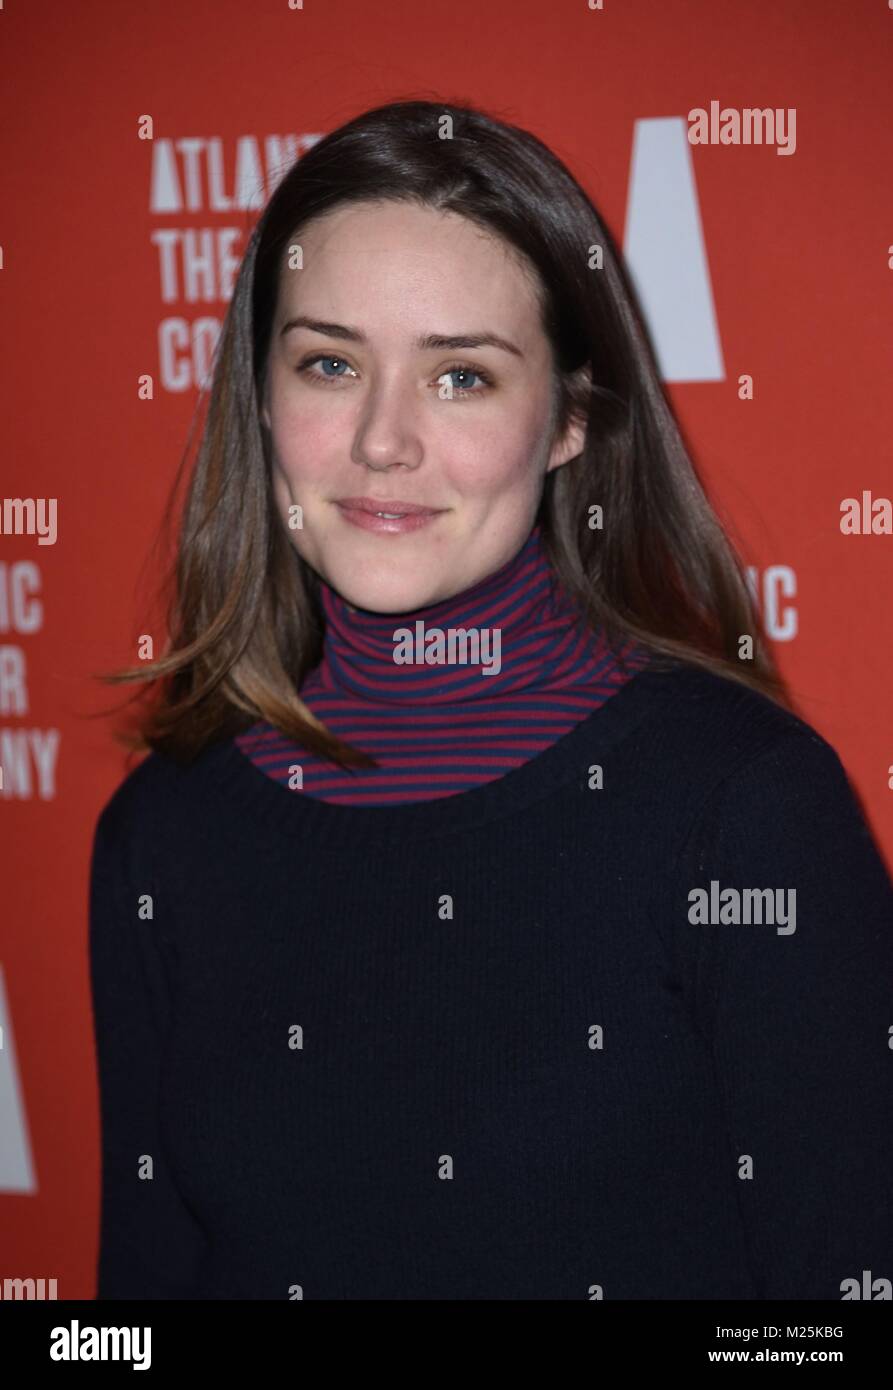 New York, NY, USA. 5th Feb, 2018. Megan Boone at arrivals for HANGMEN  Opening Night Curtain Call and Party, Linda Gross Theater, New York, NY  February 5, 2018. Credit: Derek Storm/Everett Collection/Alamy